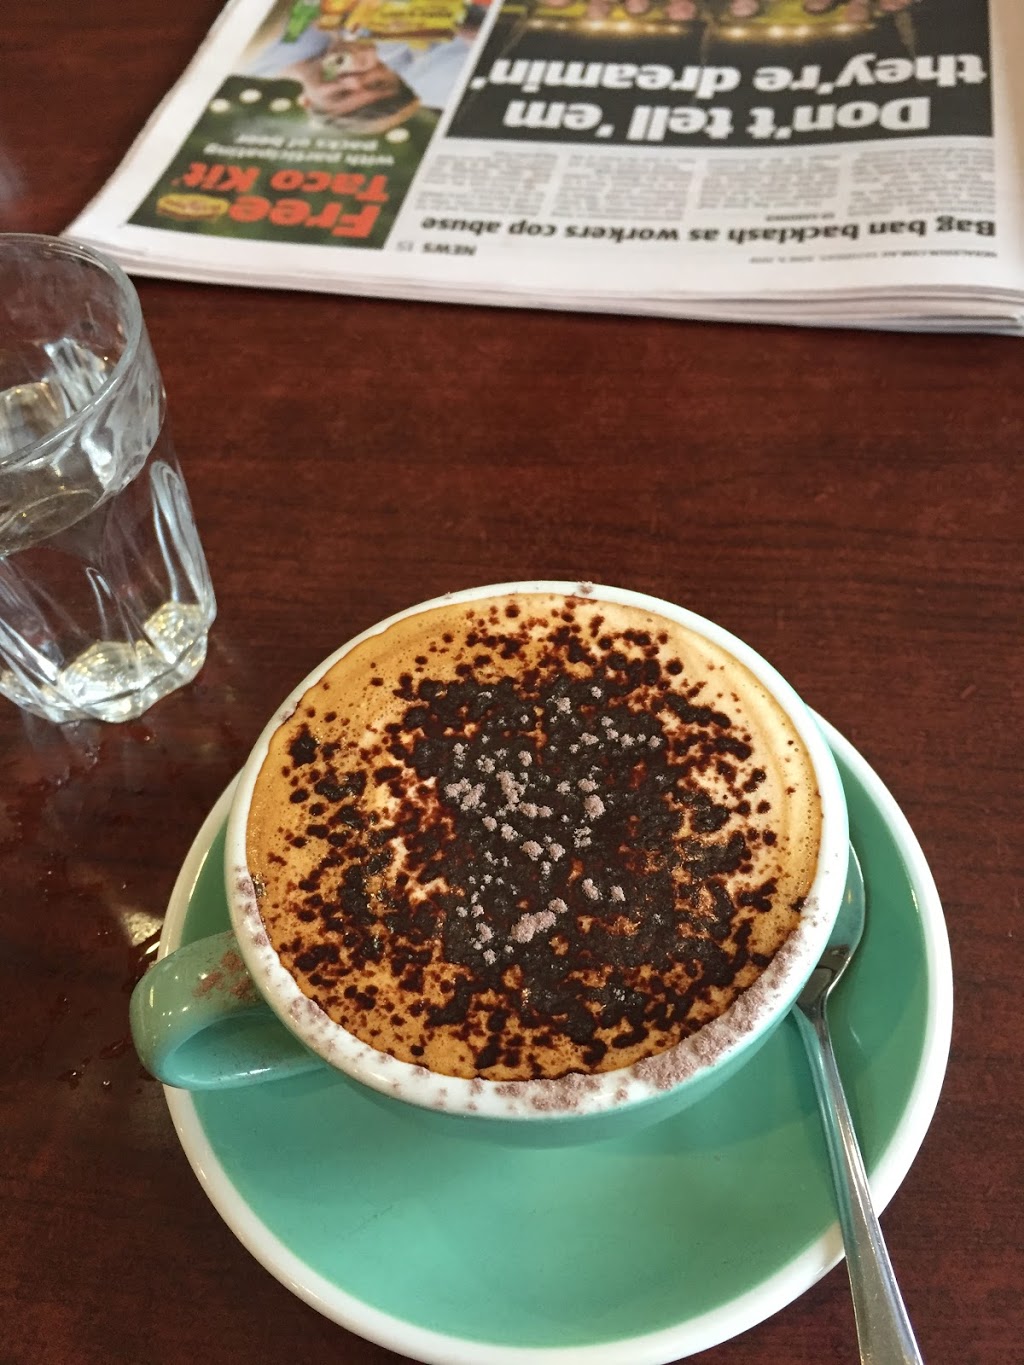 Welsford Street Cafe | cafe | 2/159 Welsford St, Shepparton VIC 3630, Australia | 0358218498 OR +61 3 5821 8498